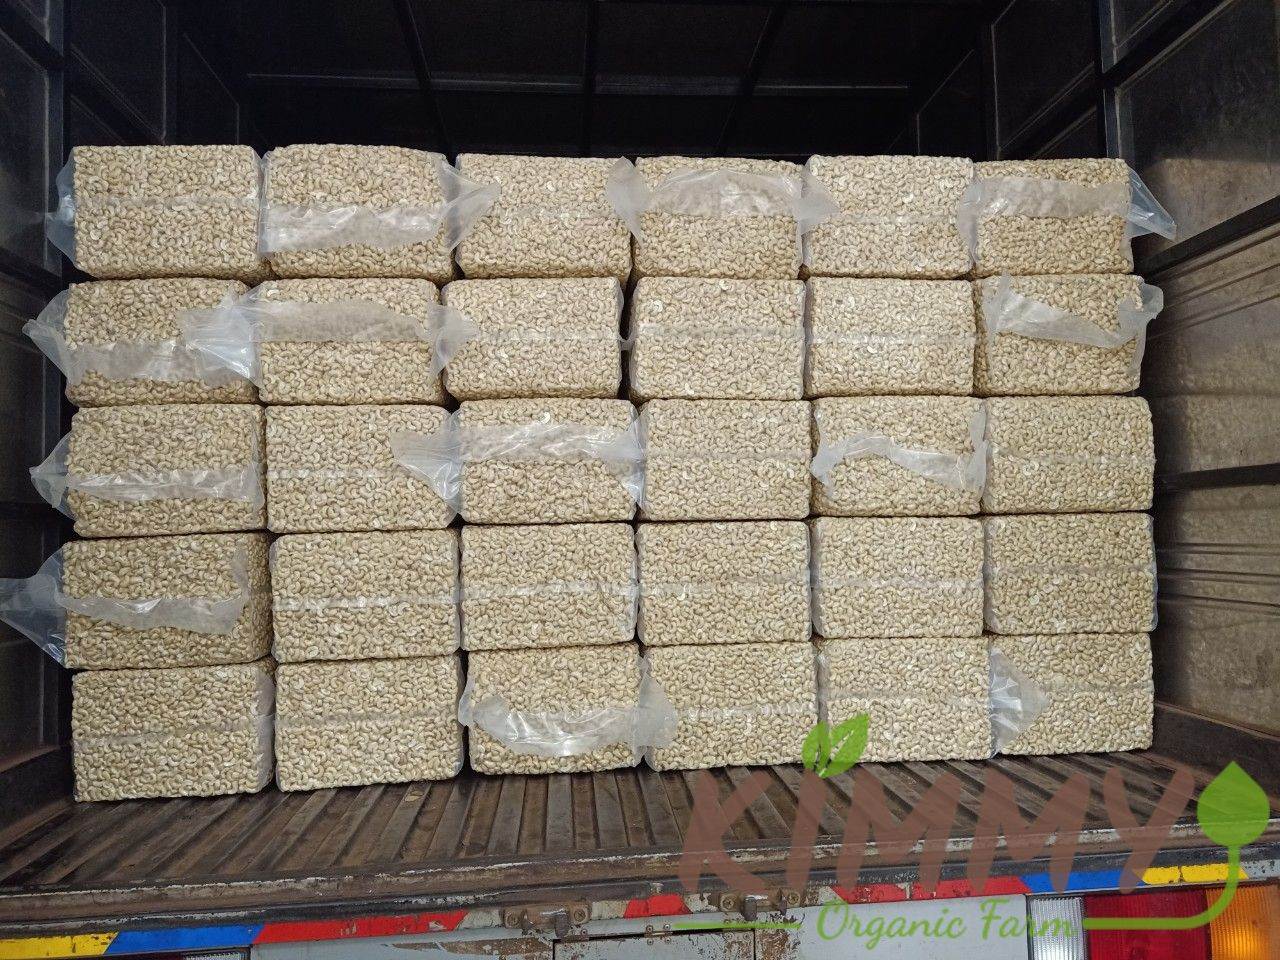 2 tons of cashew kernels ready for export-1